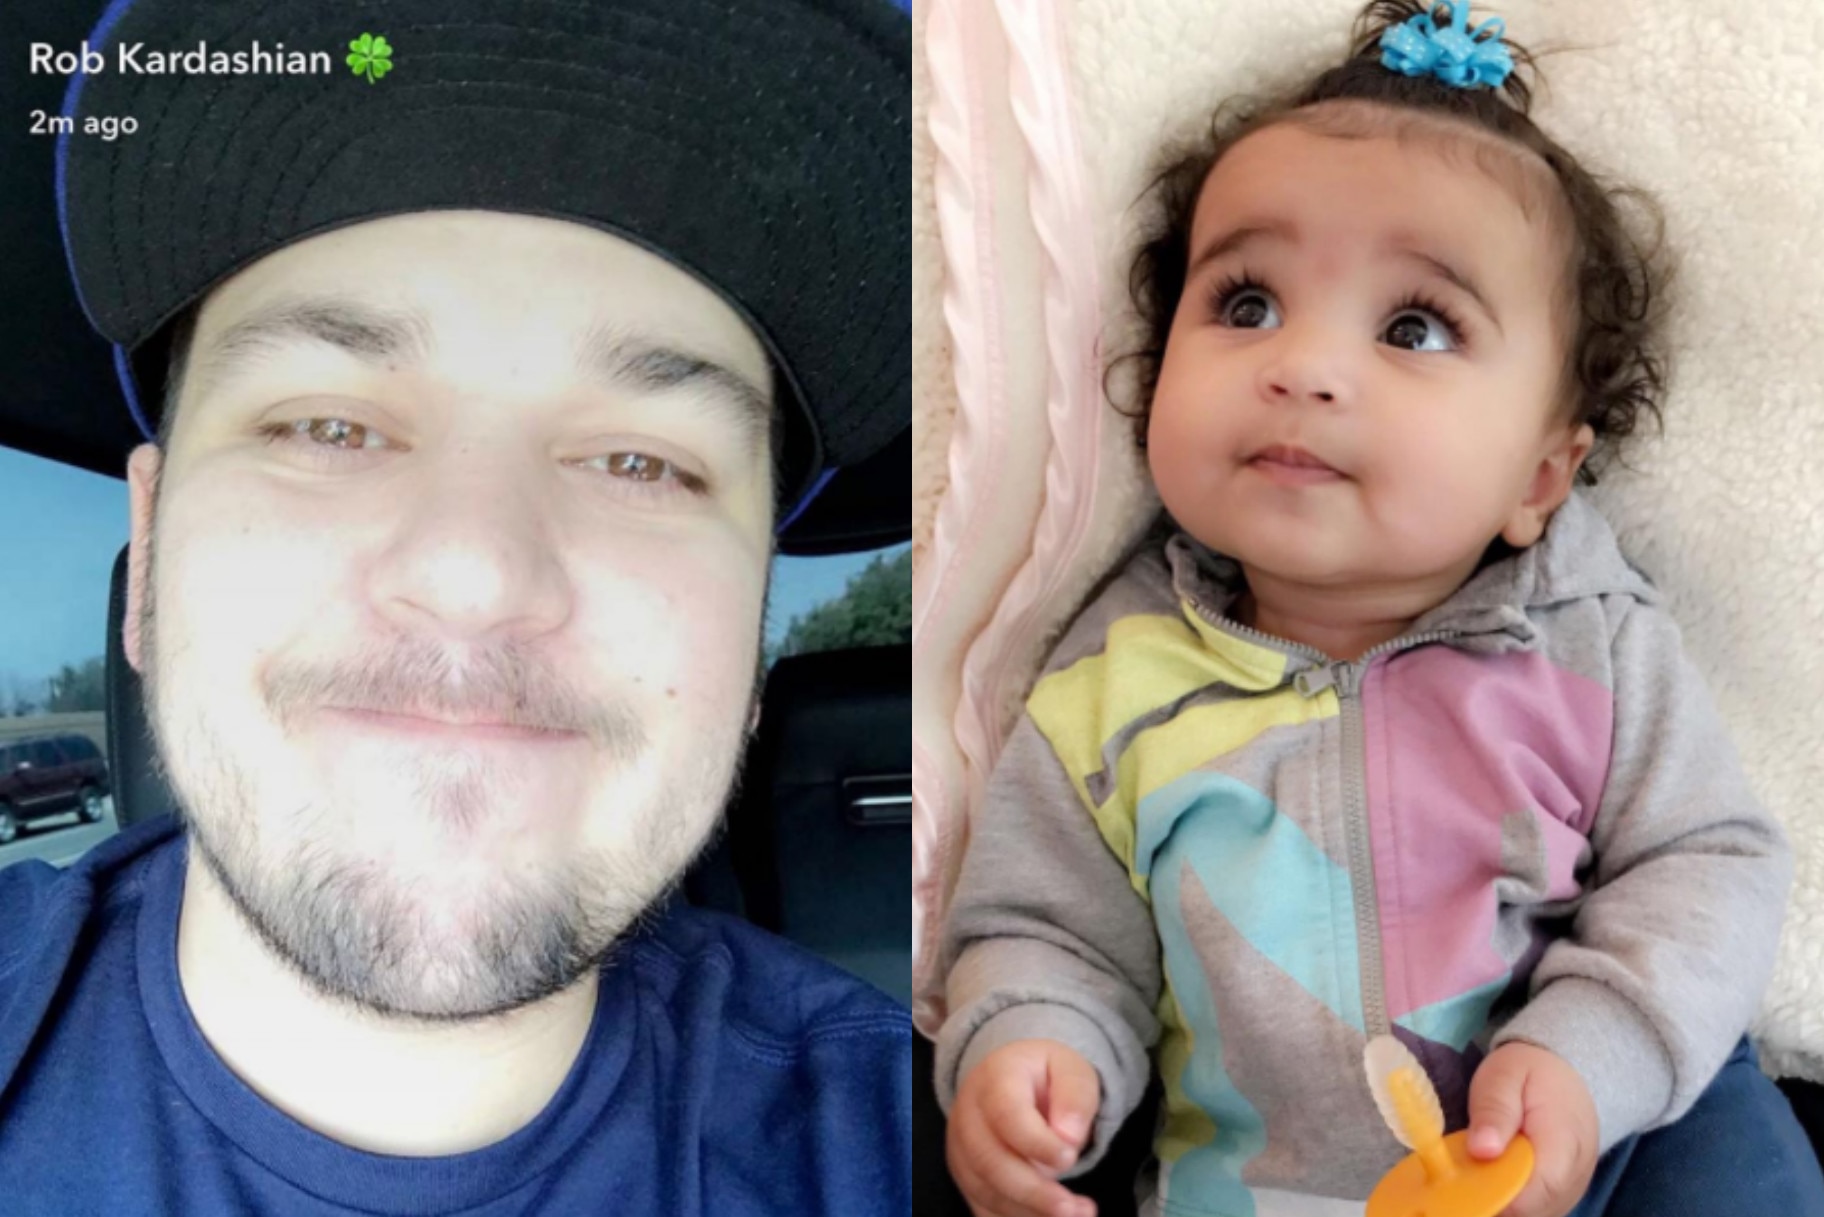 Rob Kardashian Slams Shady Instagram Post About His Daughter | Very Real1824 x 1217